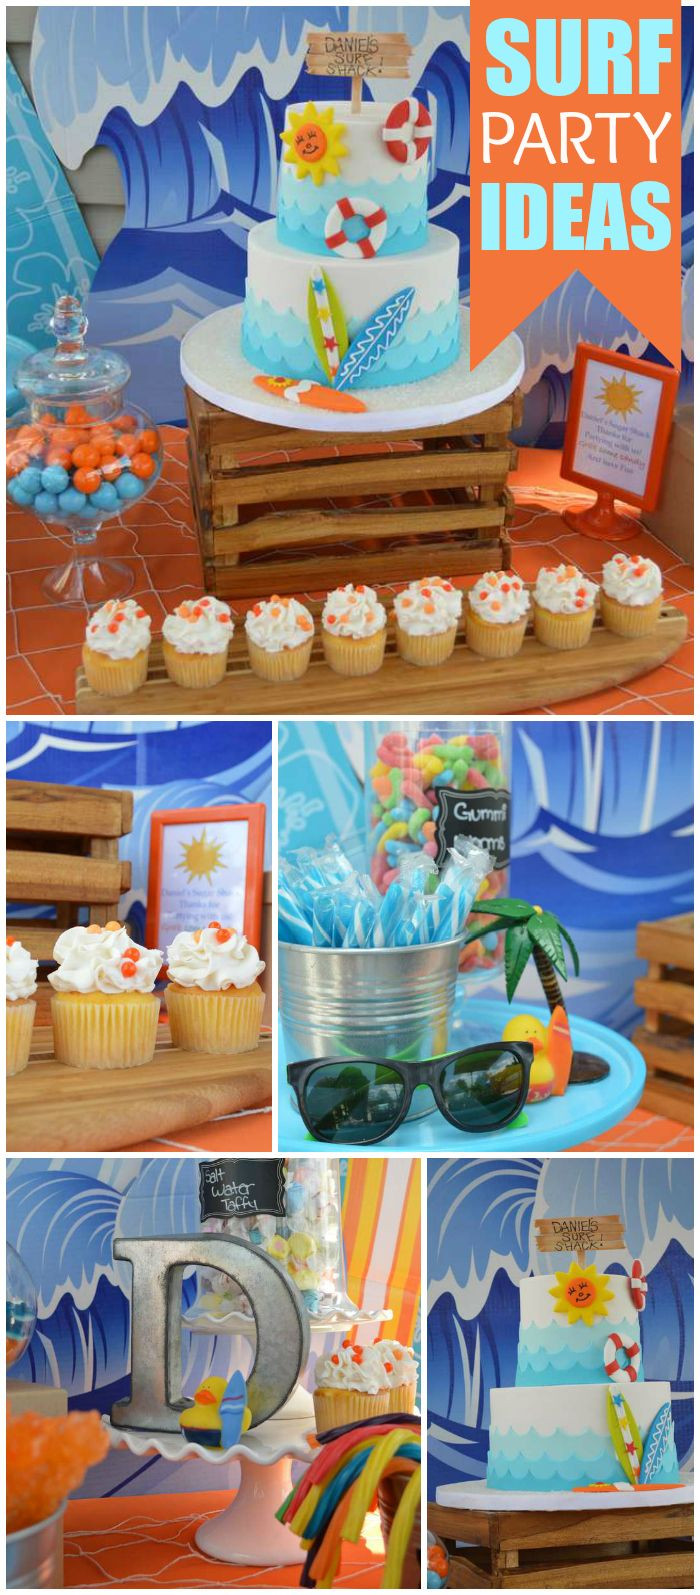 Pool Party Ideas For Boys
 What an awesome pool party with a beach surf theme See